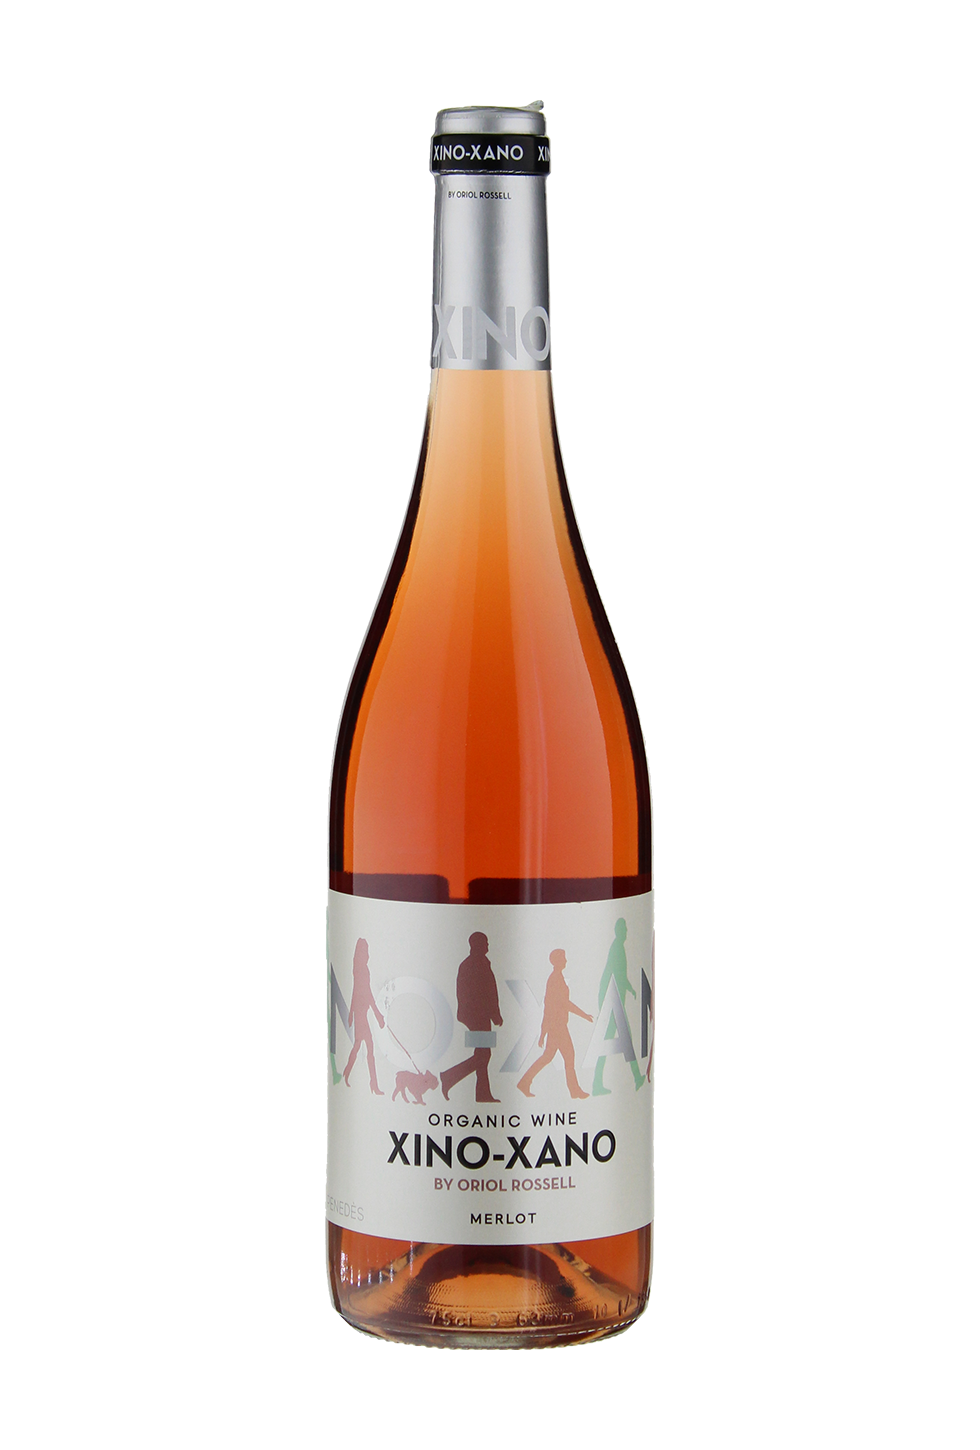 Oriol Rossell XINO-XANO Penedes D.O. 